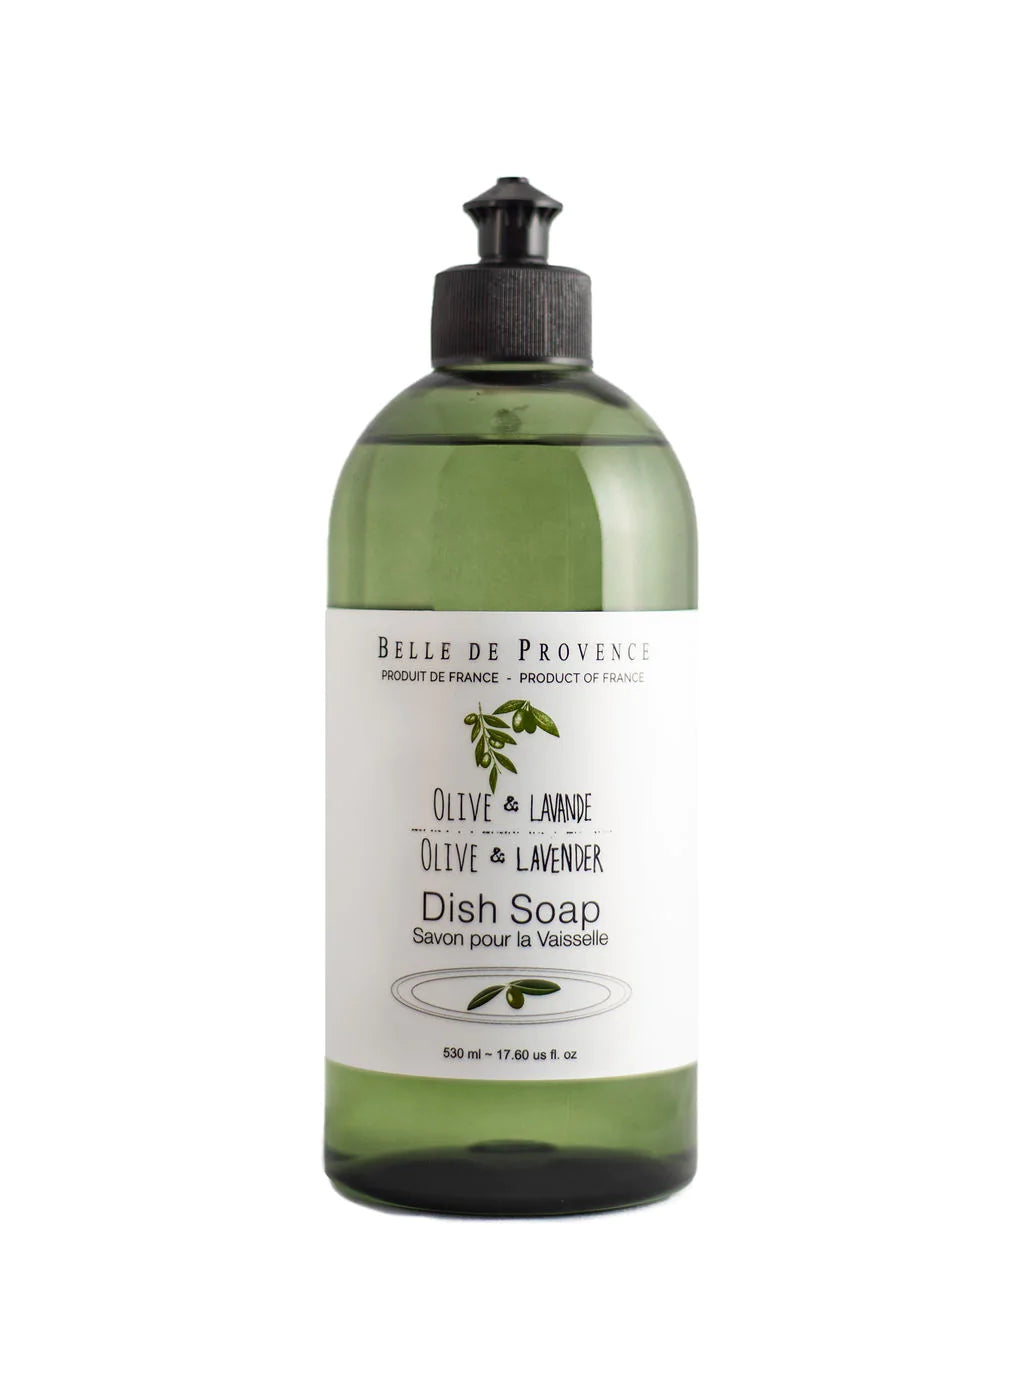 A green bottle of Lothantique Belle de Provence Olive Lavender 500ml Dish Soap is shown. The label displays a minimalistic design featuring olive and lavender illustrations. This natural dish detergent contains 530 ml or 17.90 fl oz of dish soap.